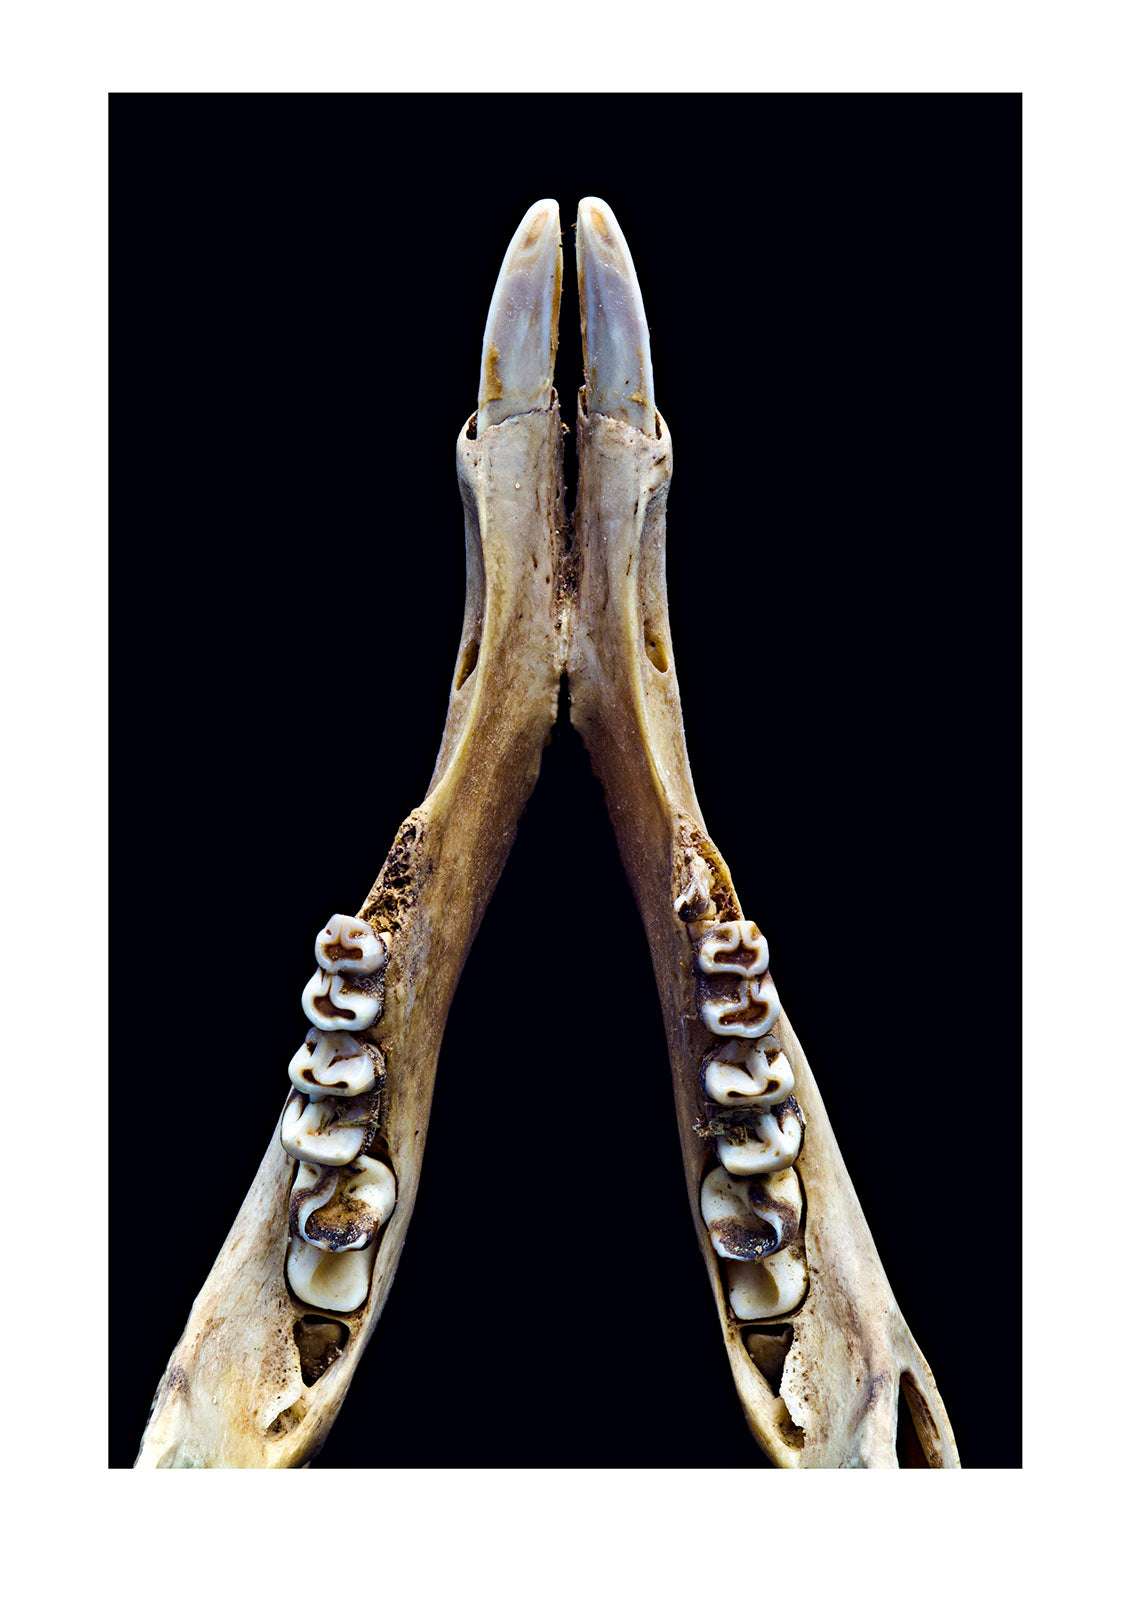 A Red Kangaroo jaw manible and teeth in a museum archive. Melbourne Museum, Victoria, Australia.